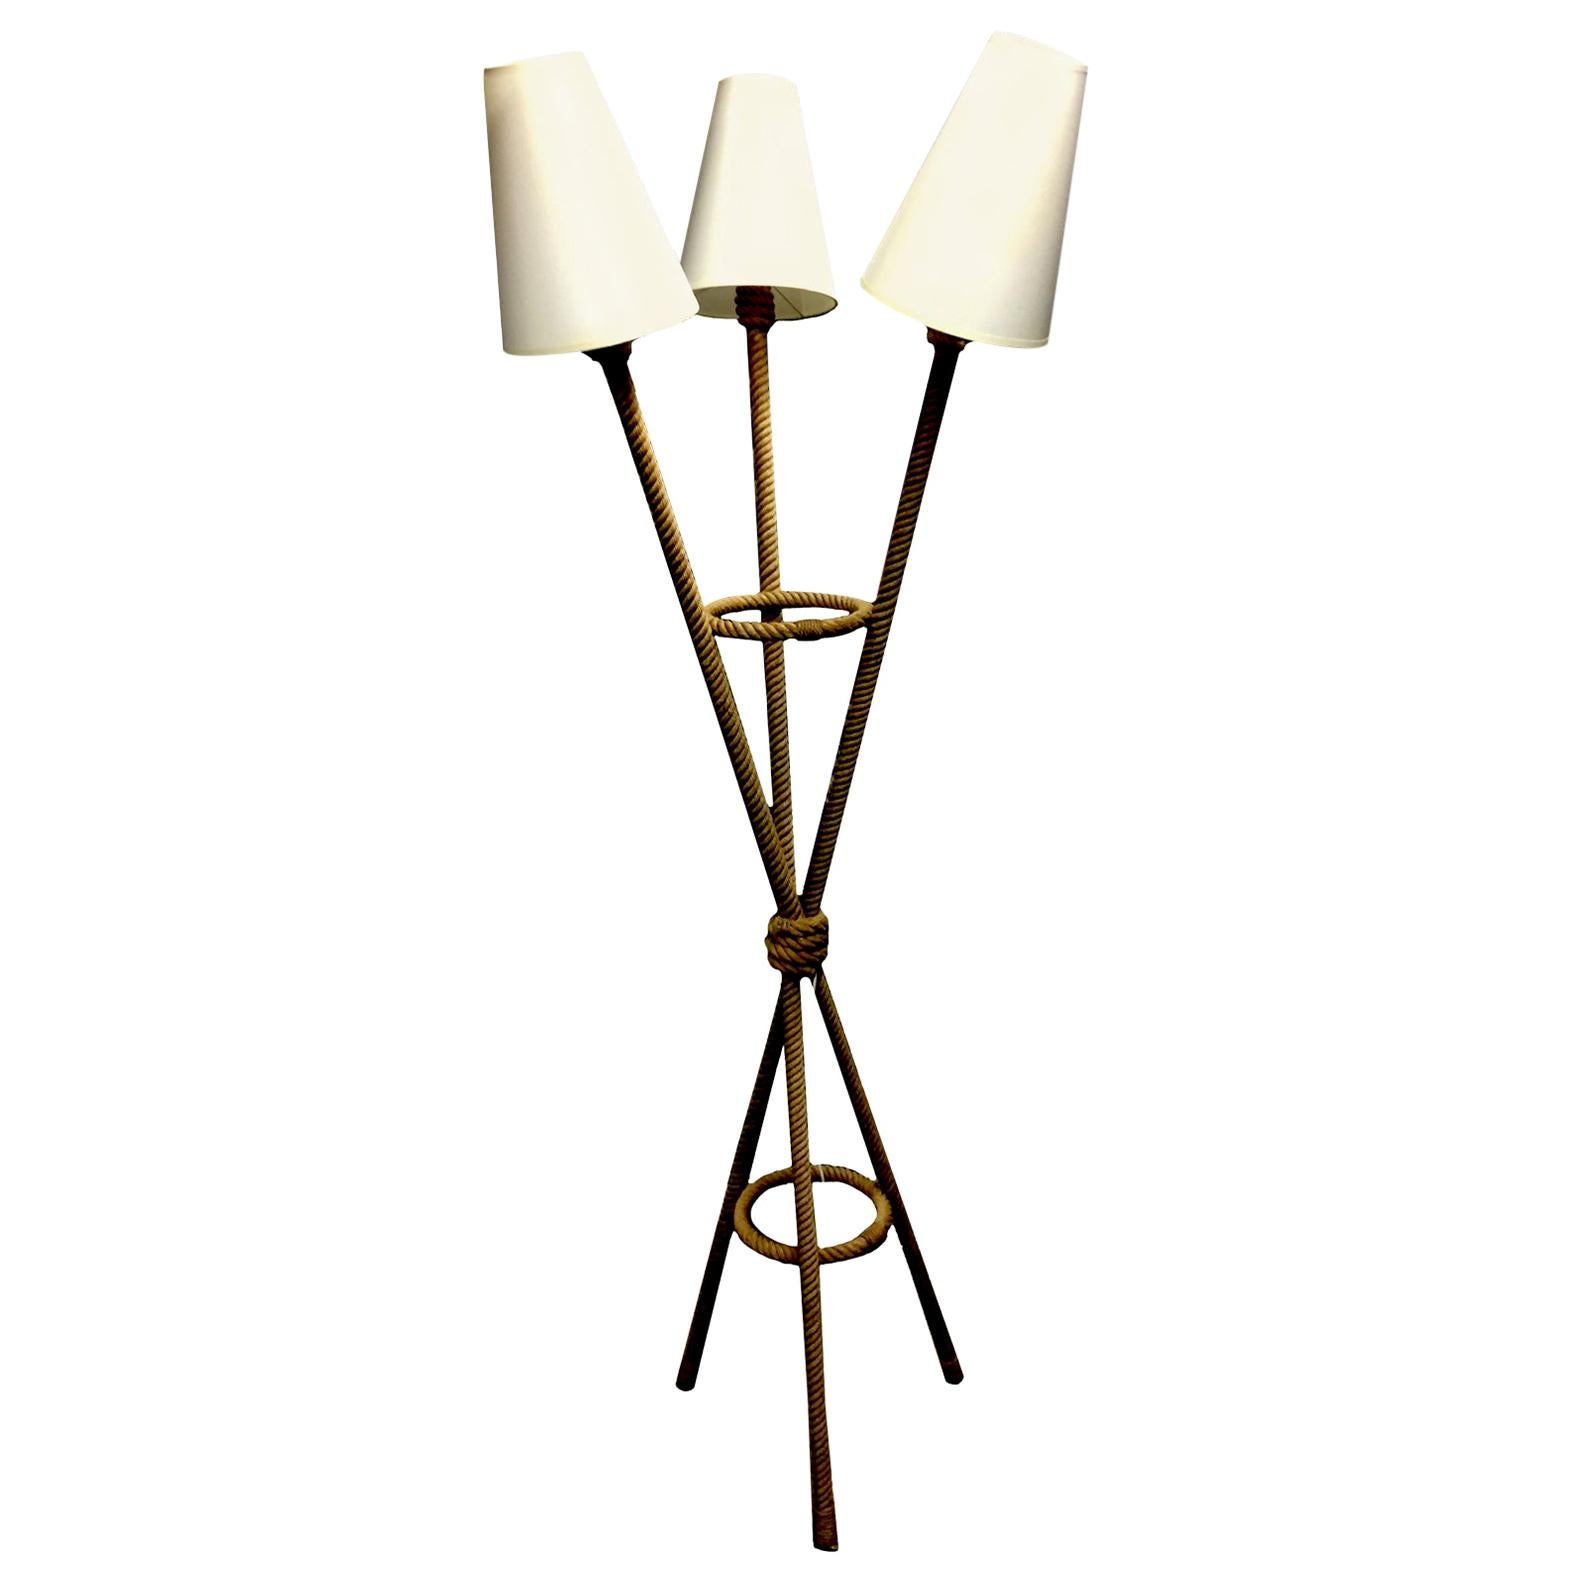 1960s French Tripod Multi-Shade Rope Floor Lamp